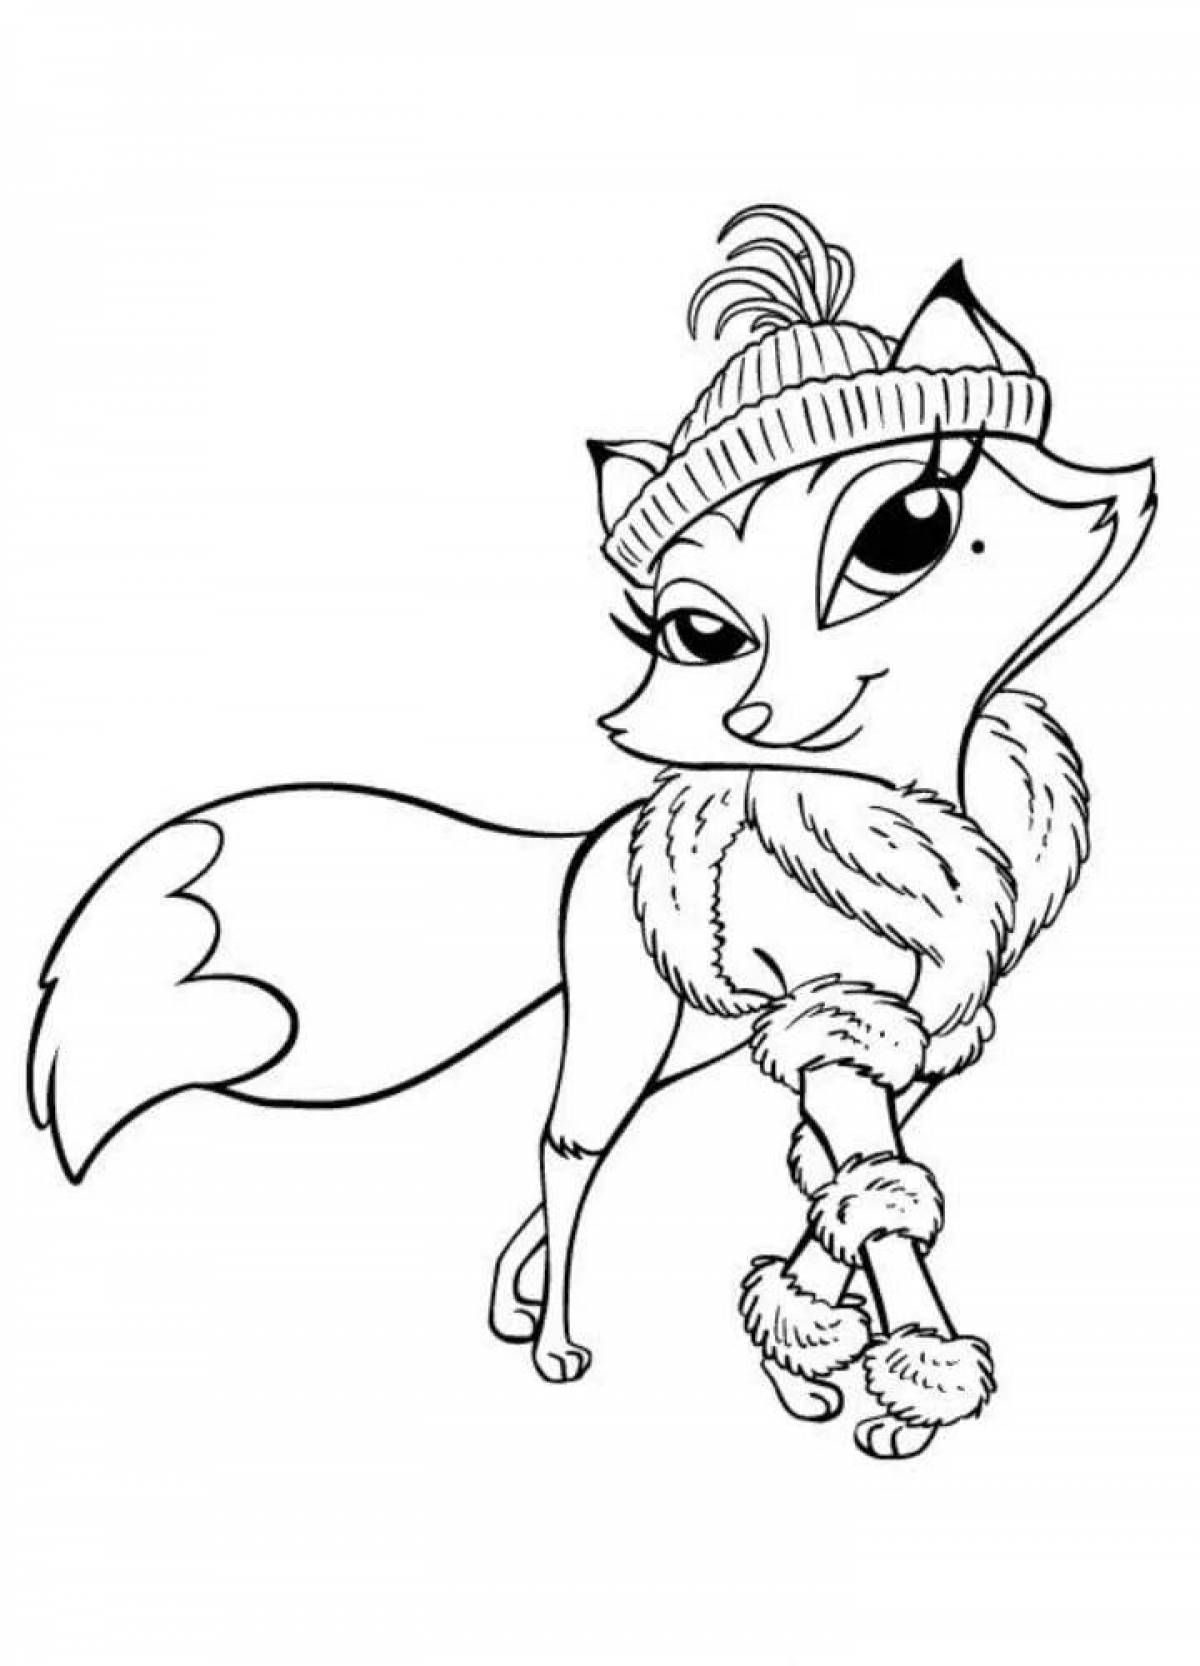 Charming fox coloring book for kids